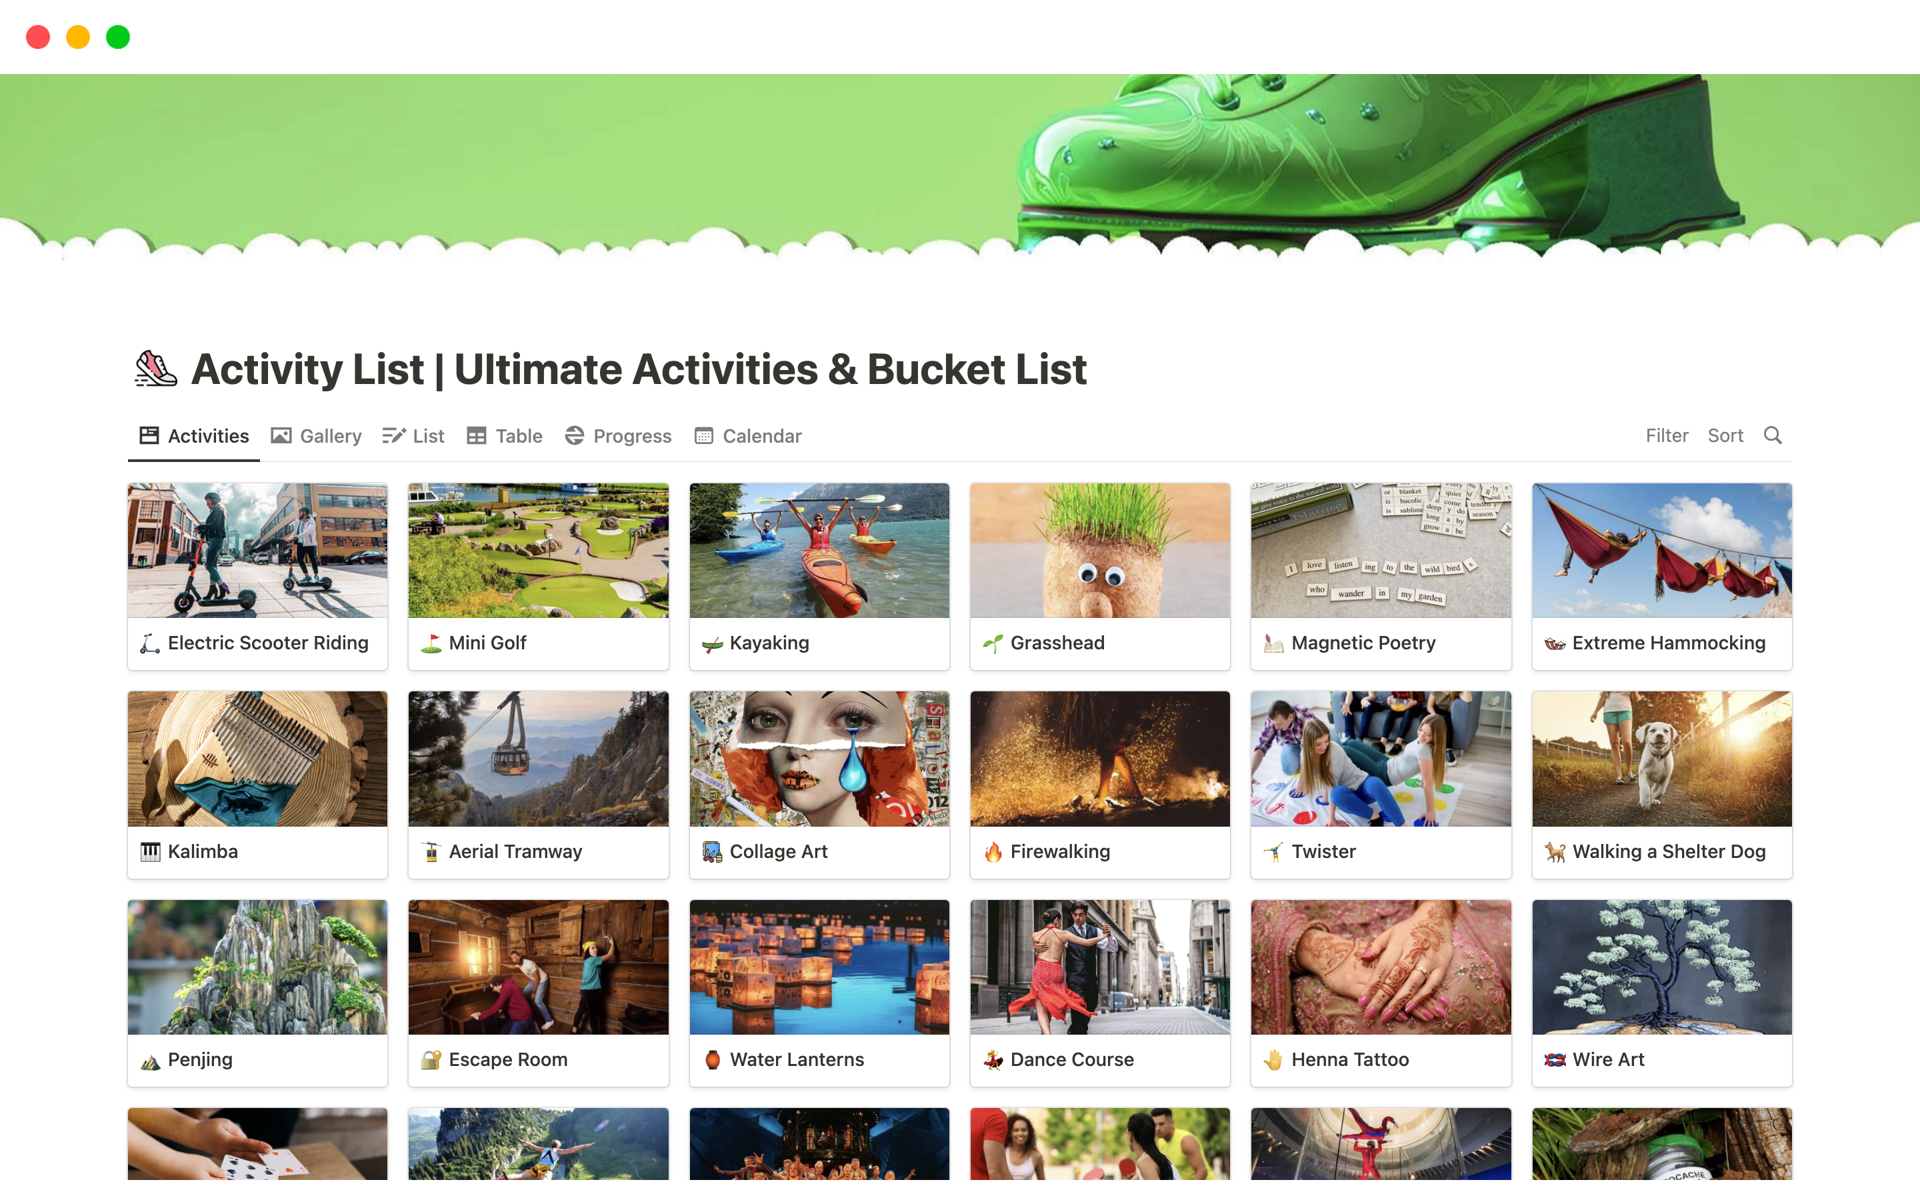 The template contains 150 activity ideas for never running out of fun things to do, to make life worth living; therefore it is the perfect Bucket List as well, generalized enough for bringing joy across age, gender, financial background or location.